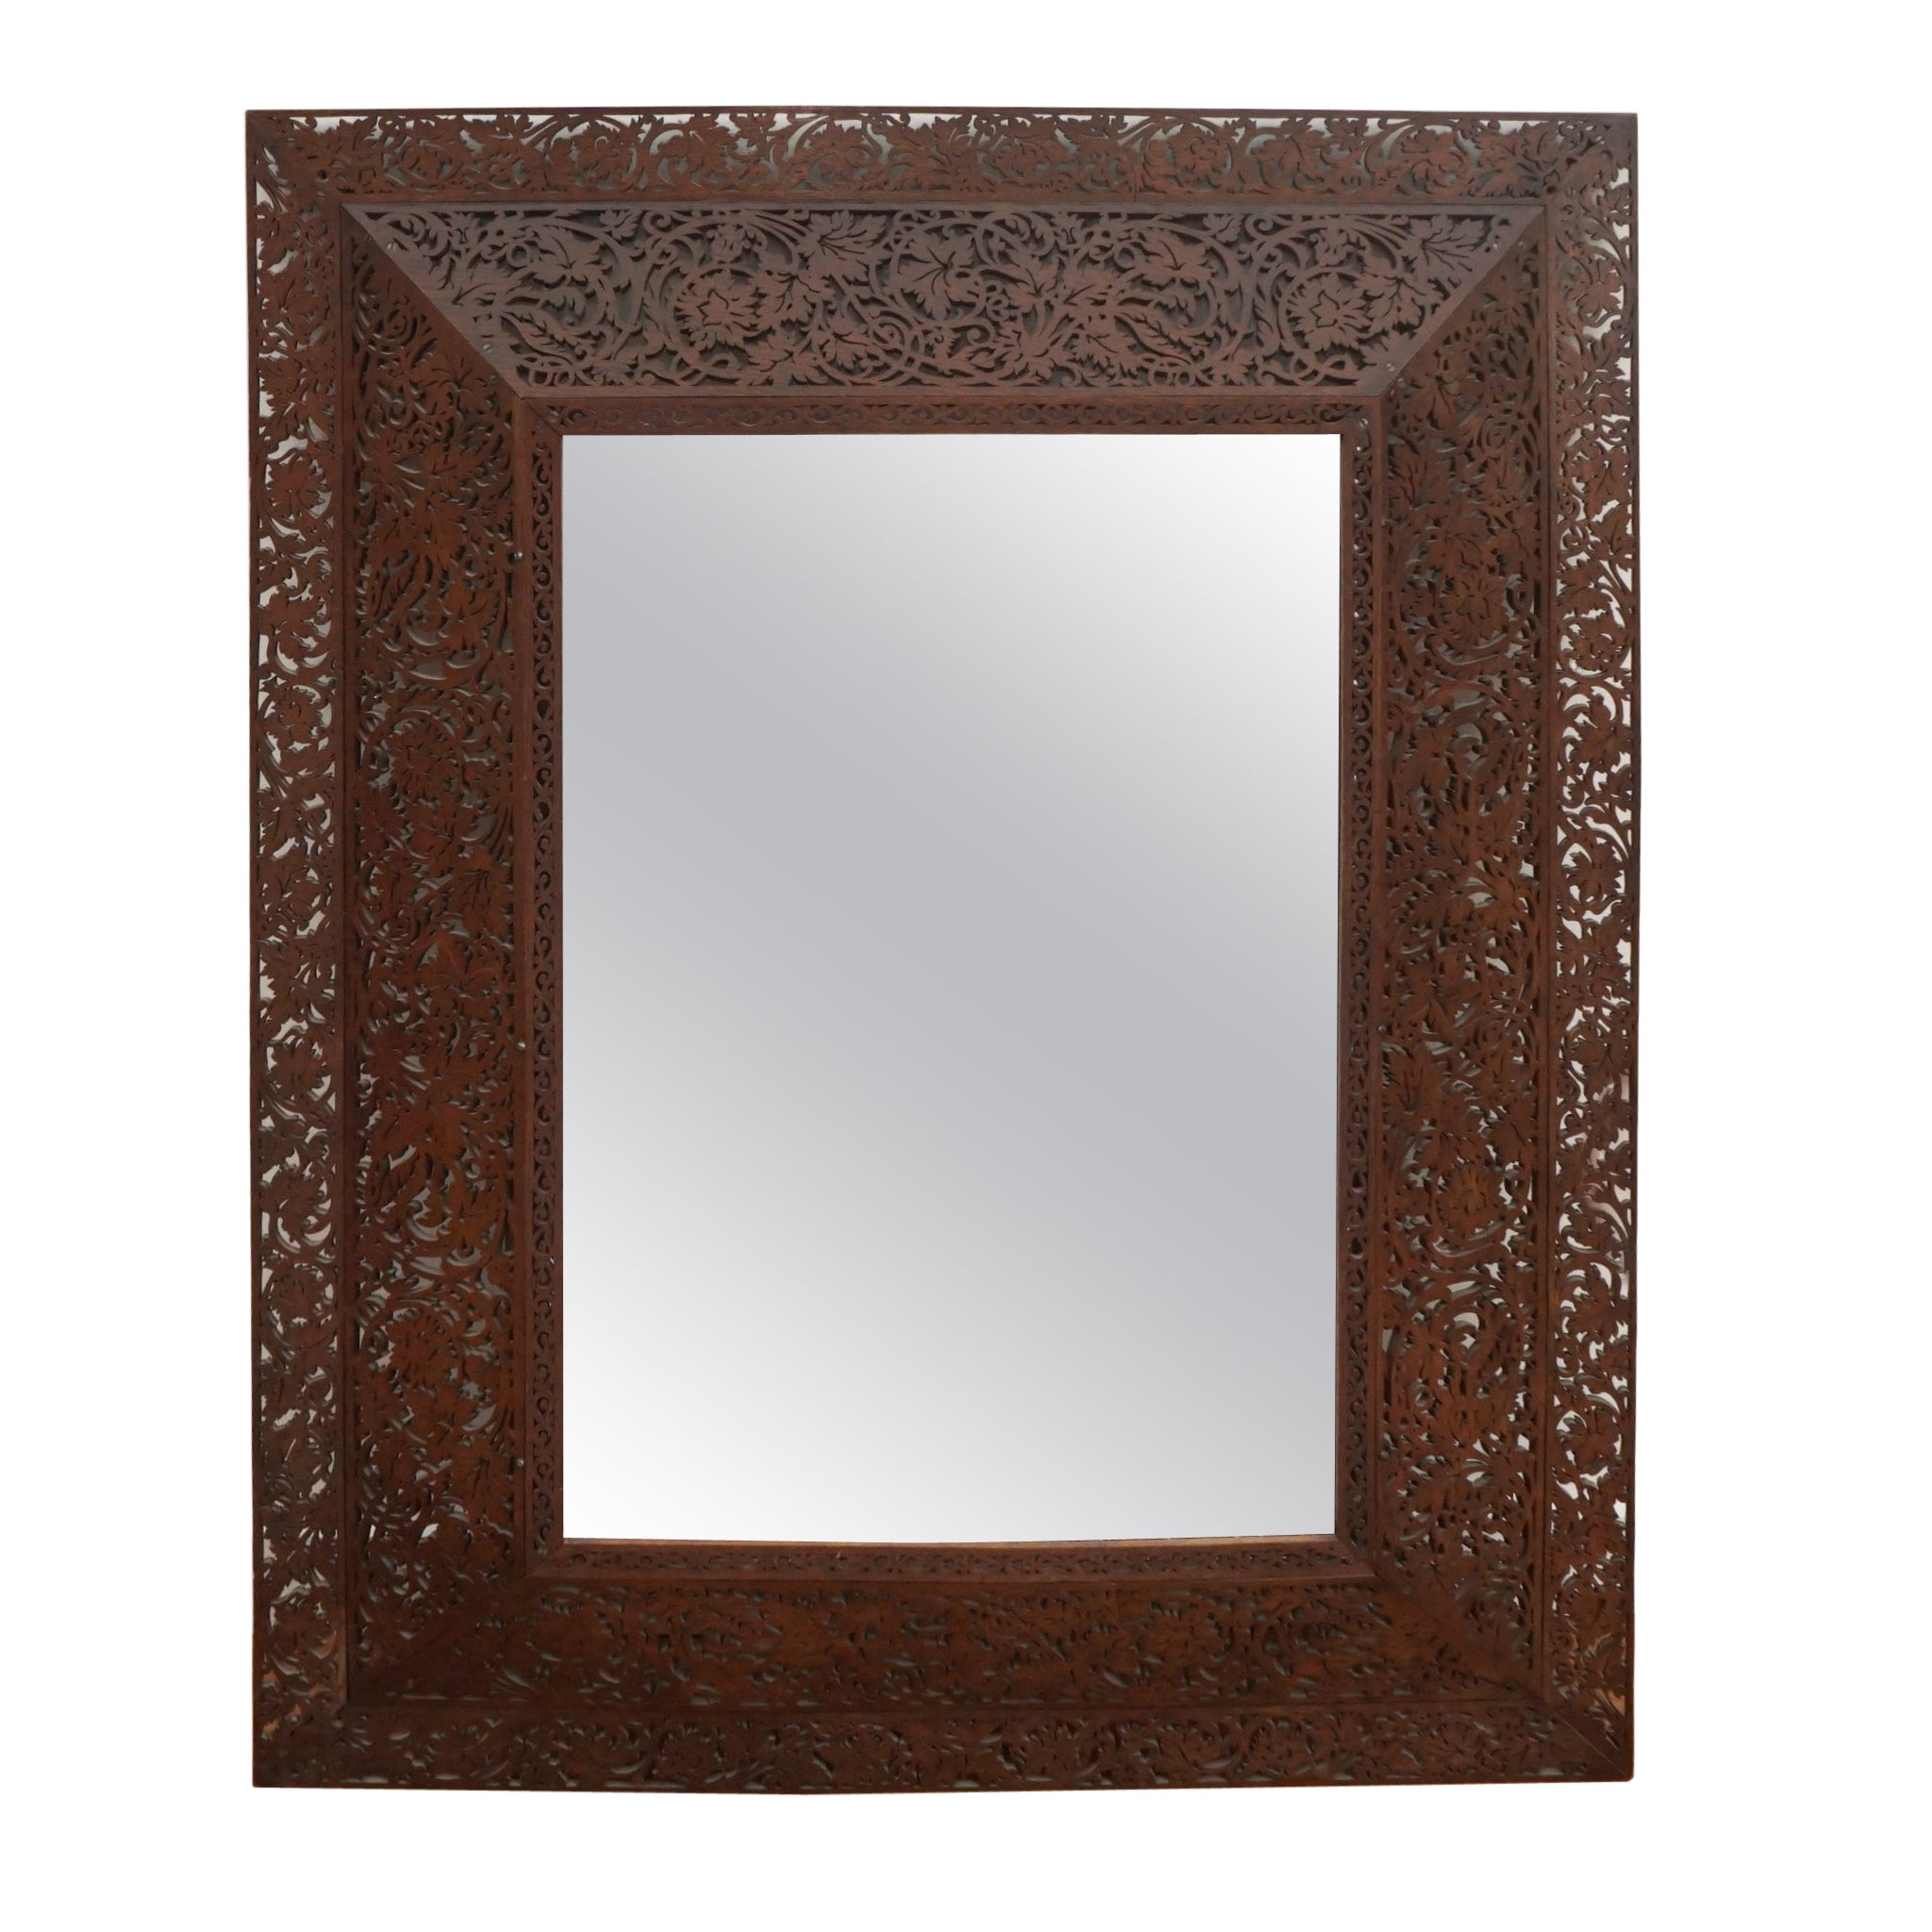 French Ornate Carved Wood Frame Mirror For Sale